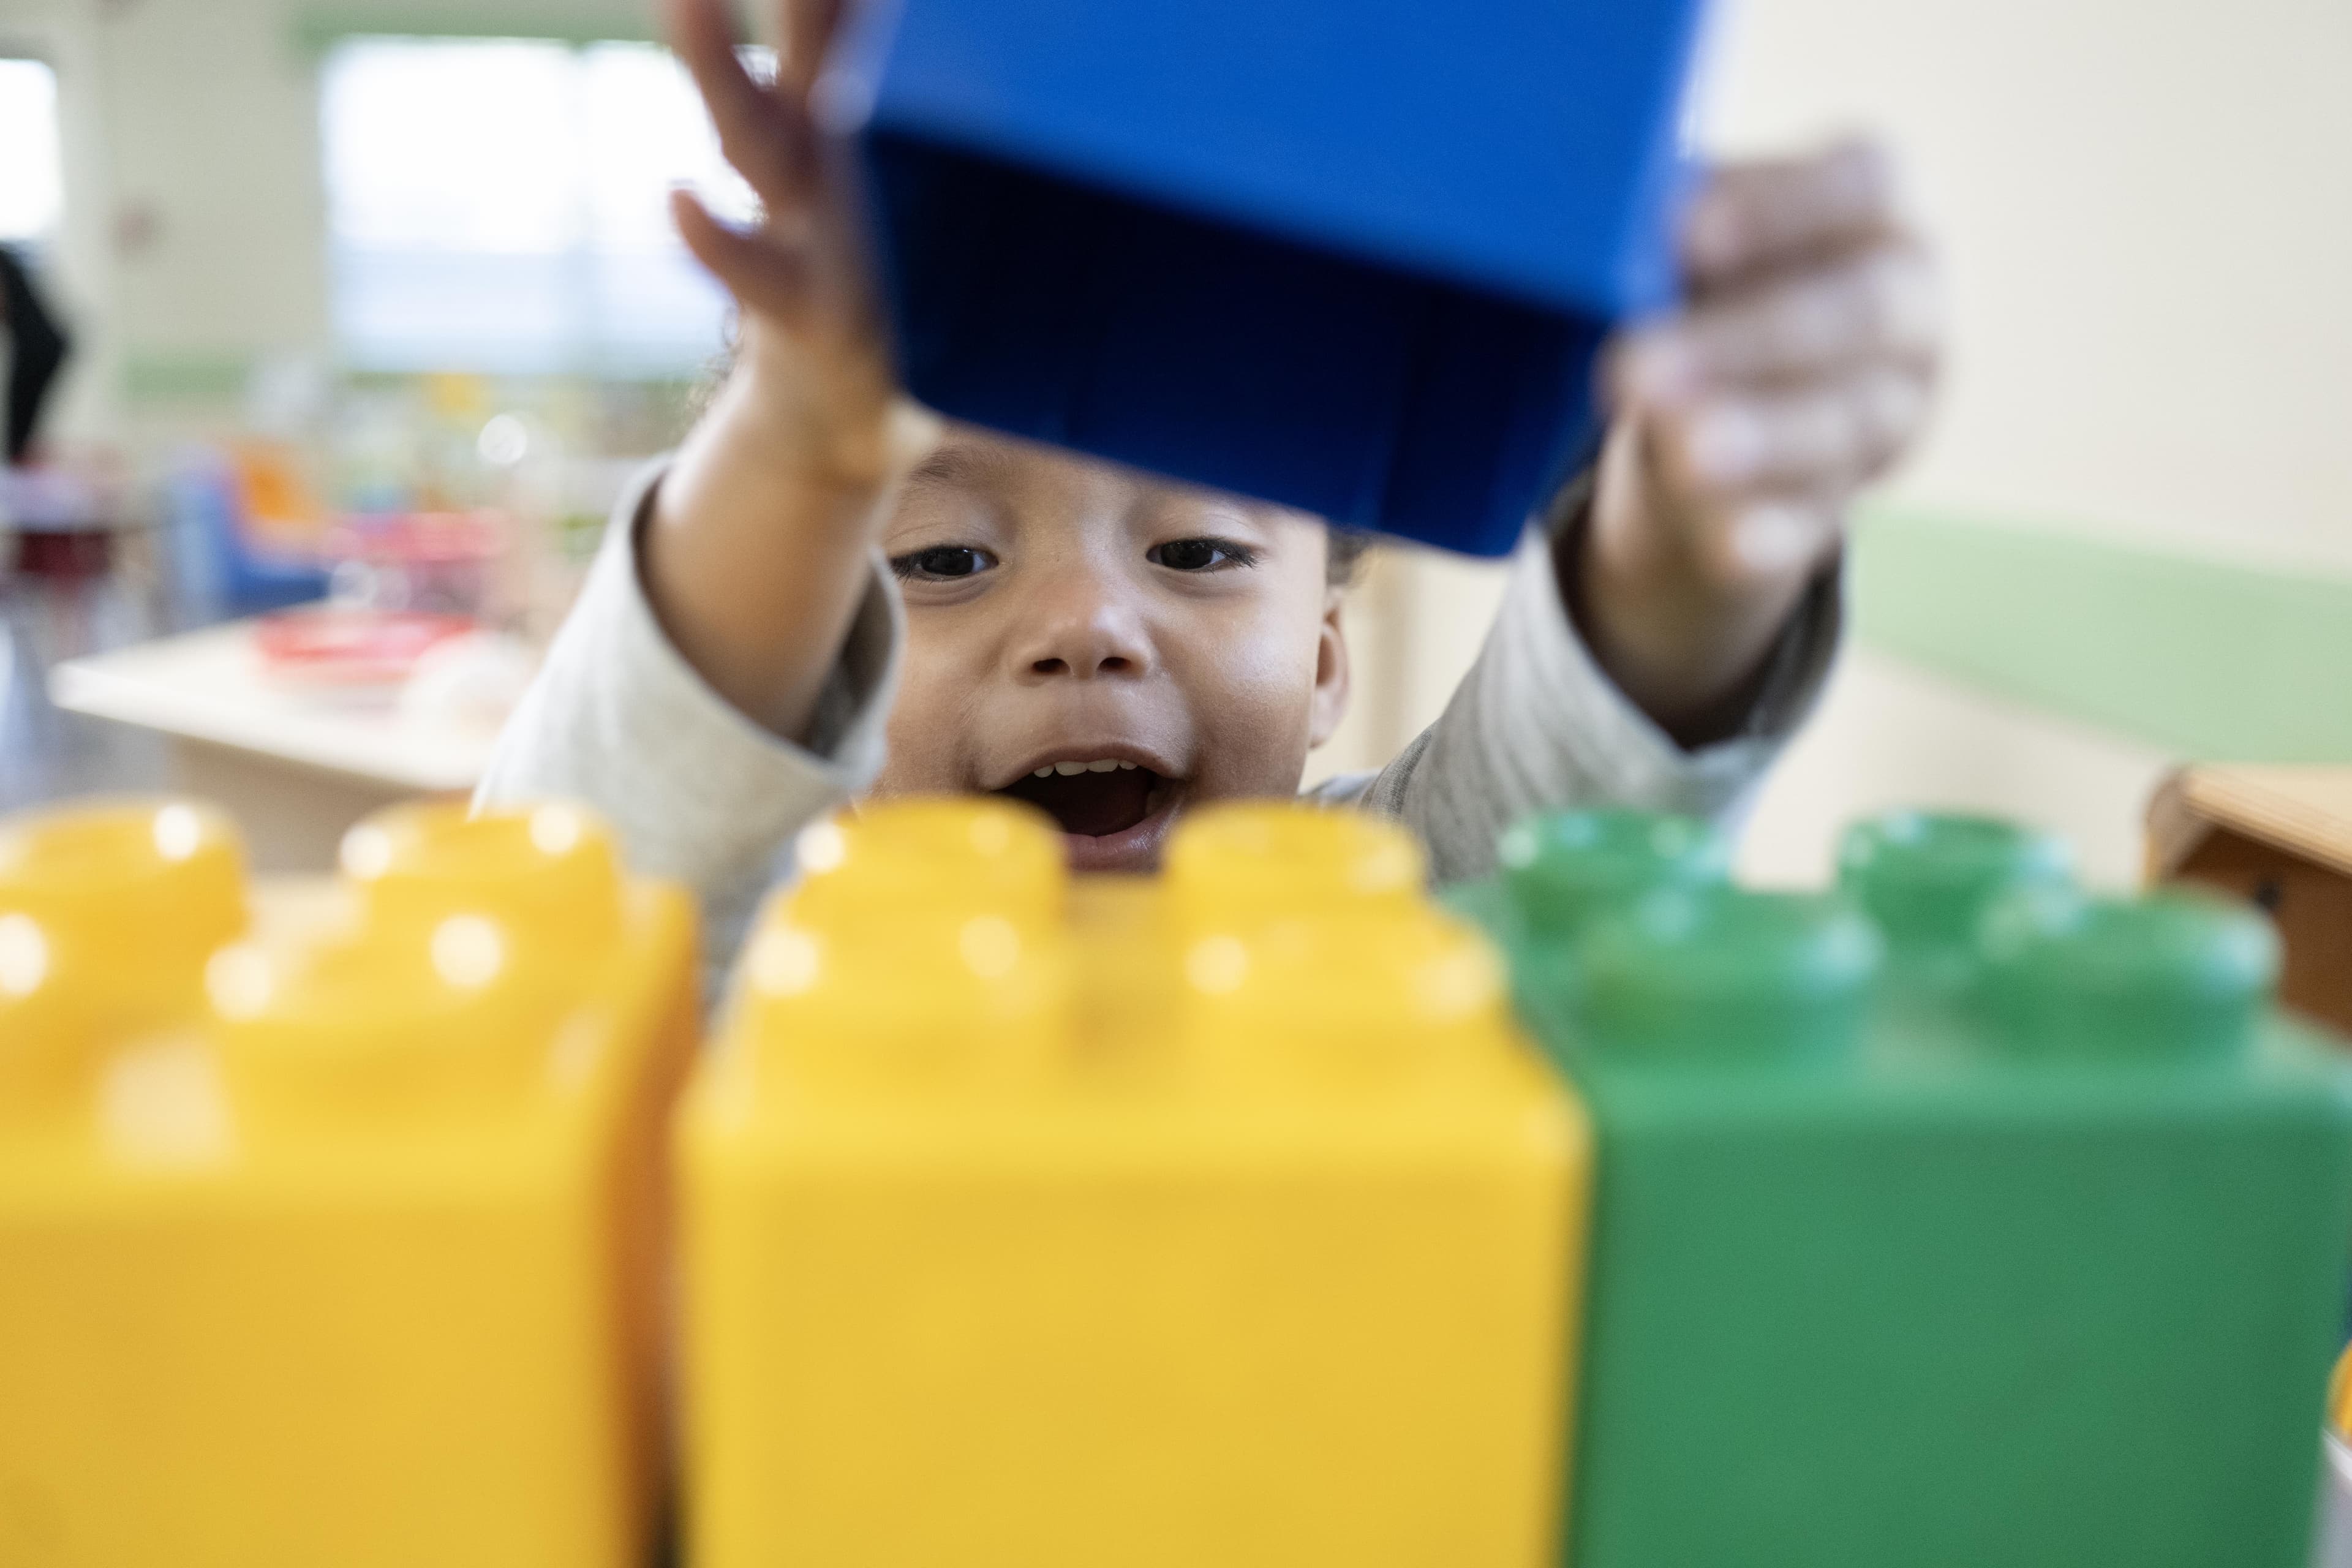 A boy playing with giant lego blocks